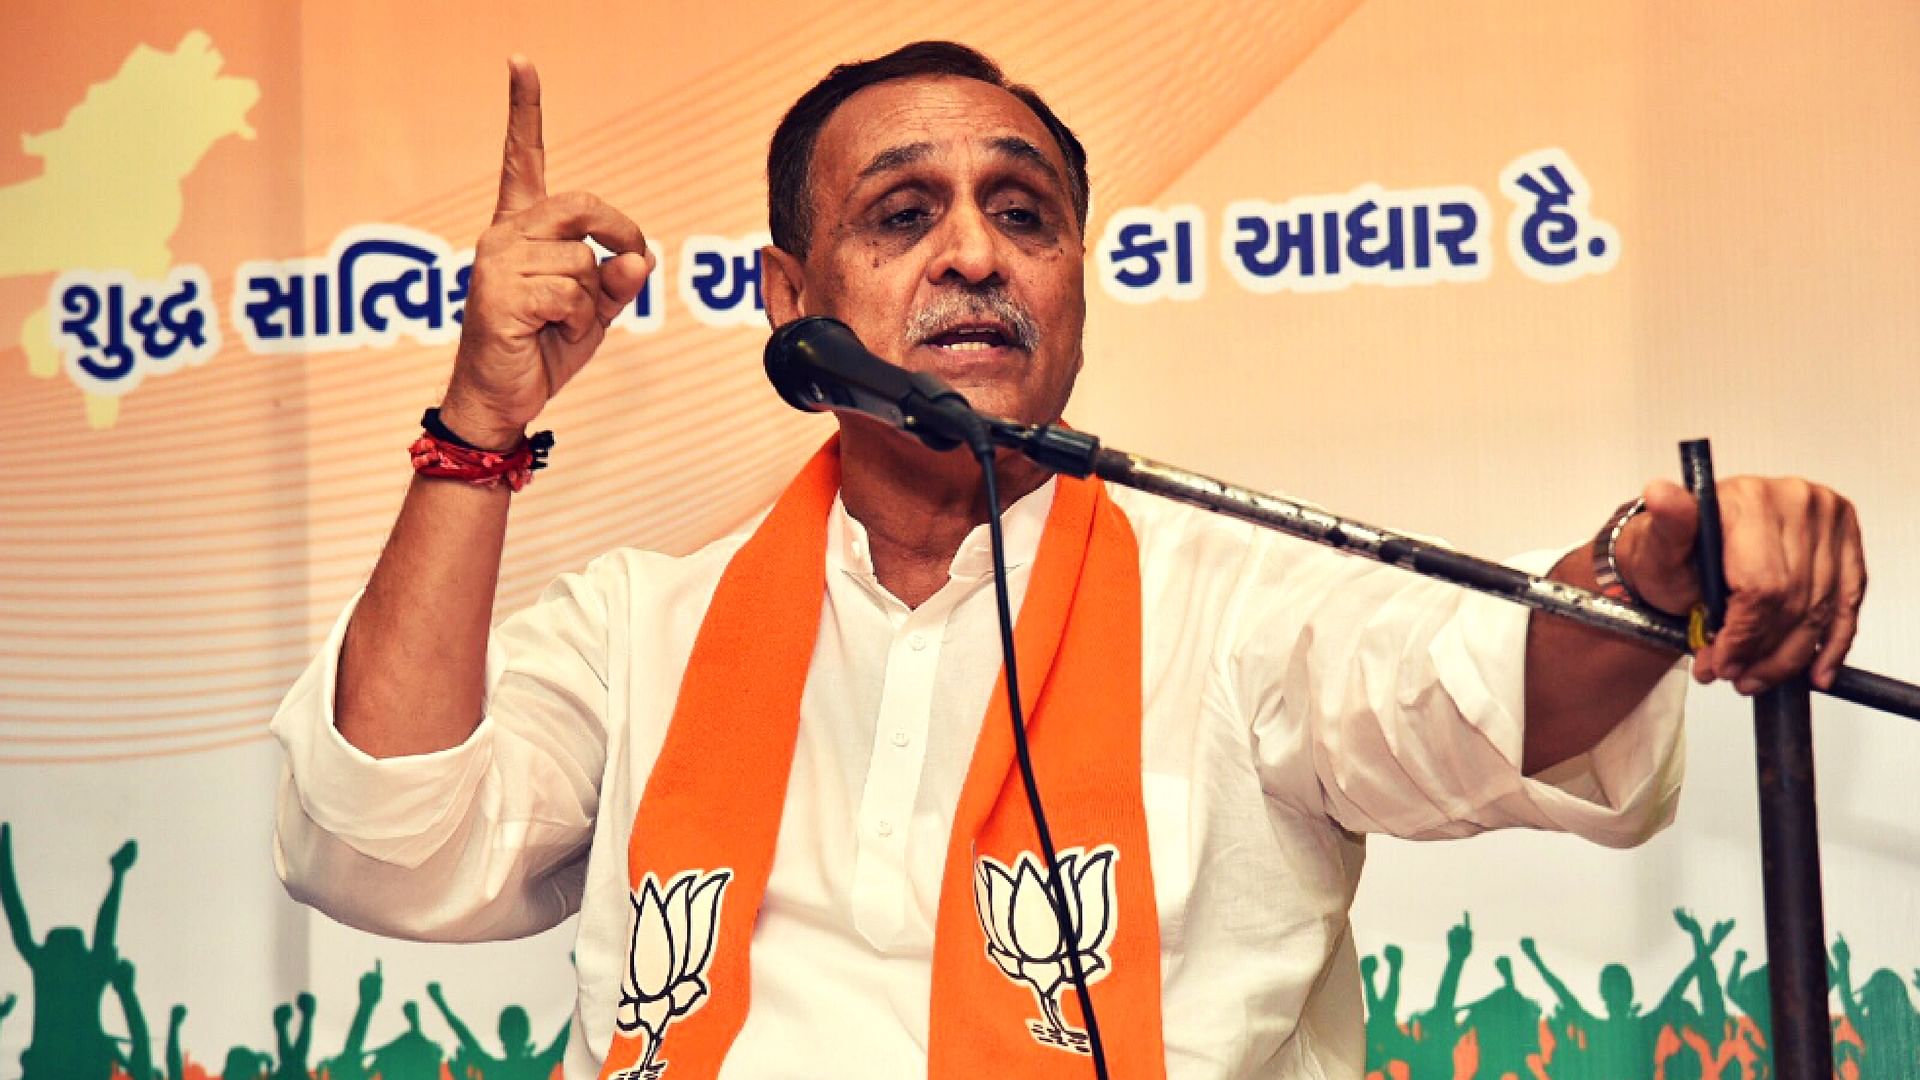 Vijay Rupani was the best choice for the Chief Ministership. (Photo Courtesy: Twitter/<a href="https://twitter.com/vijayrupanibjp/media">Vijay Rupani</a>)